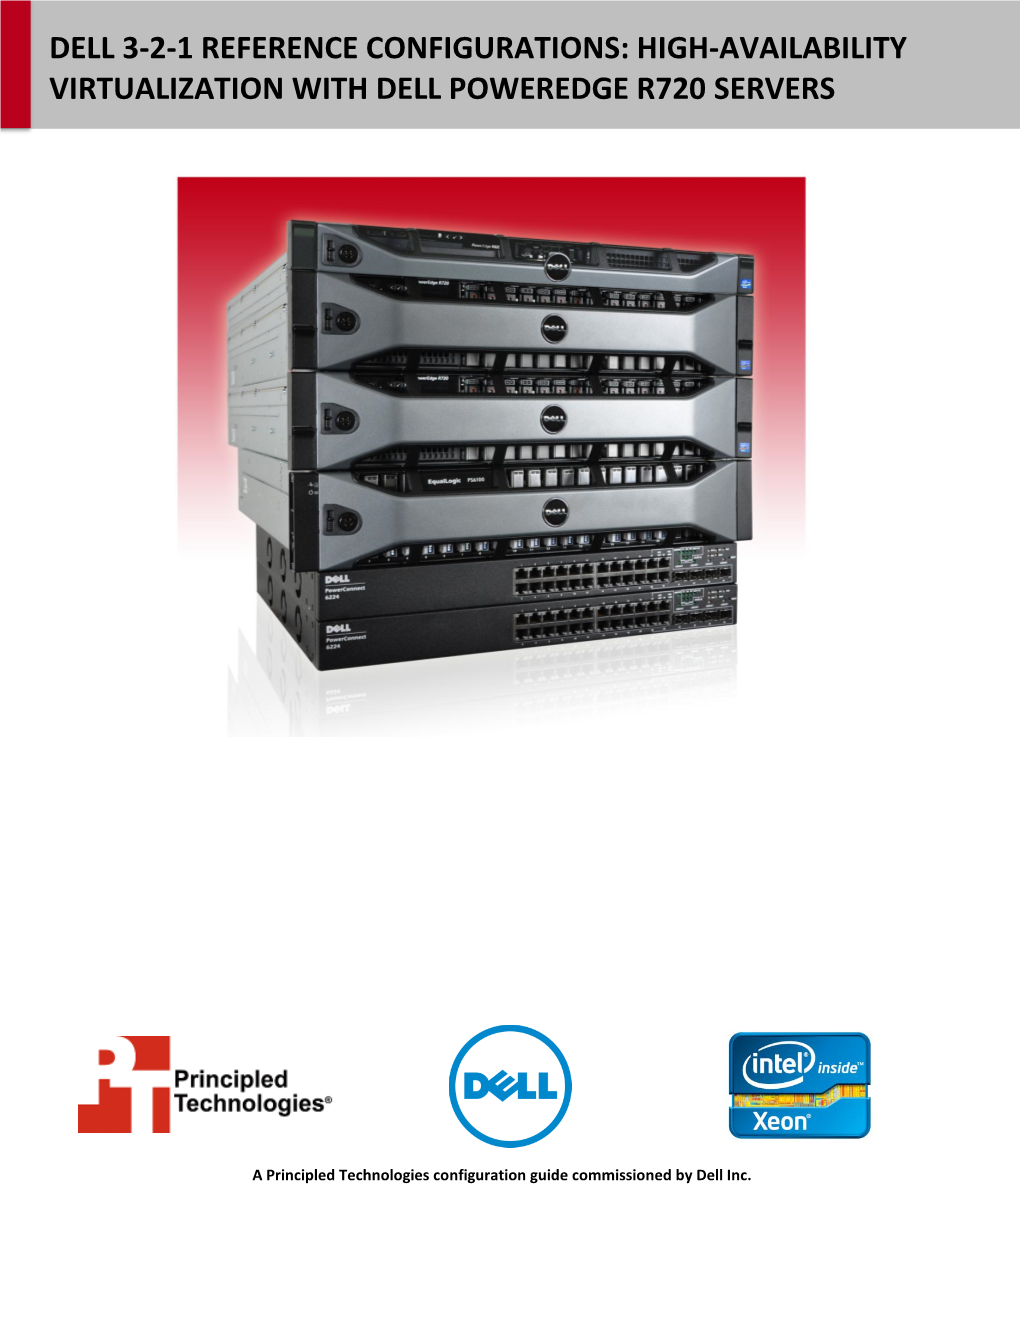 High-Availability Virtualization with Dell Poweredge R720 Servers